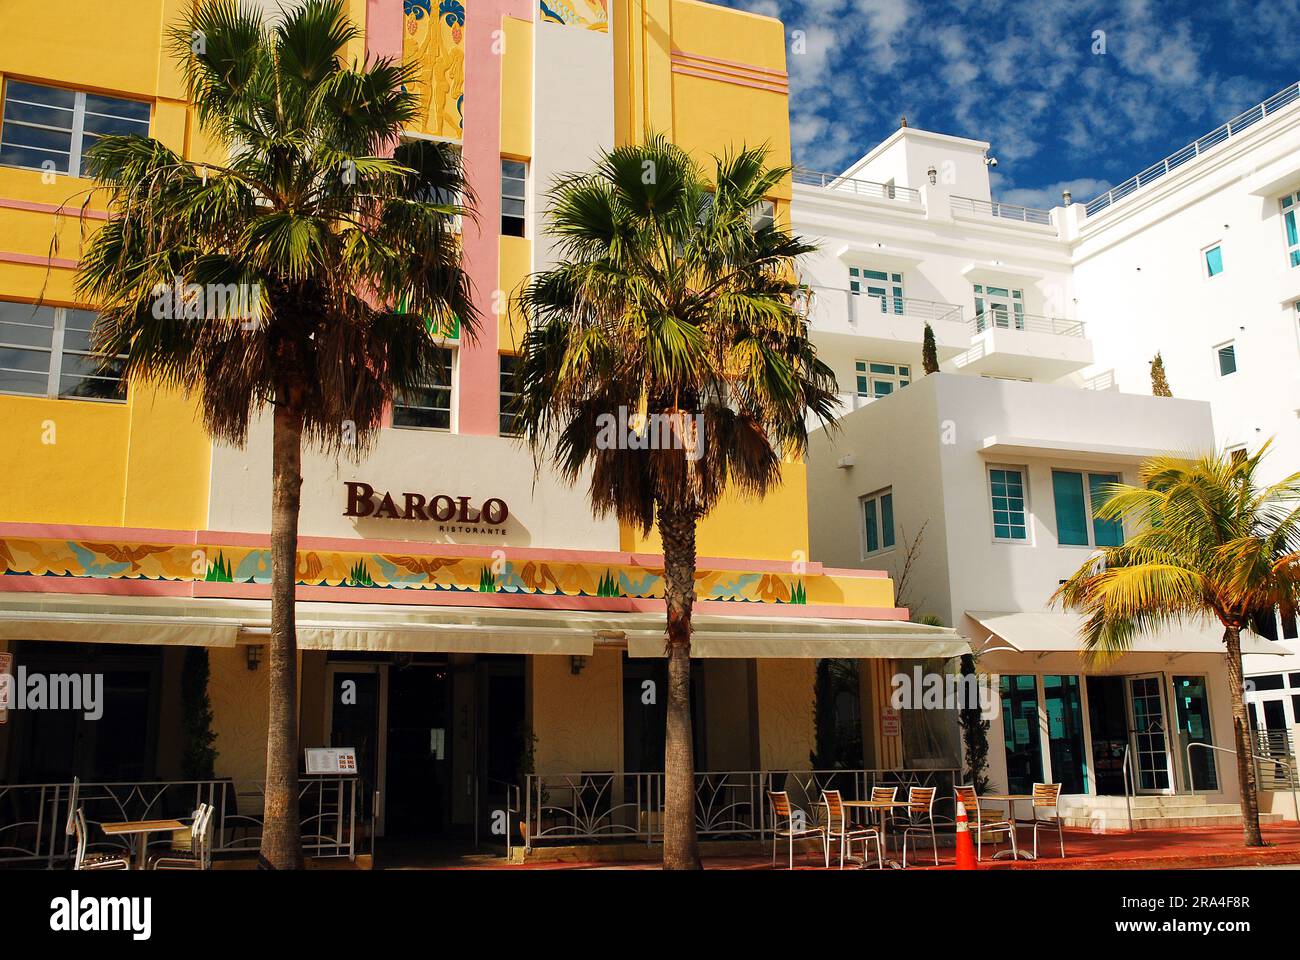 The Barolo restaurant is housed in a colorful Art Deco building in Miami Beach, Florida Stock Photo